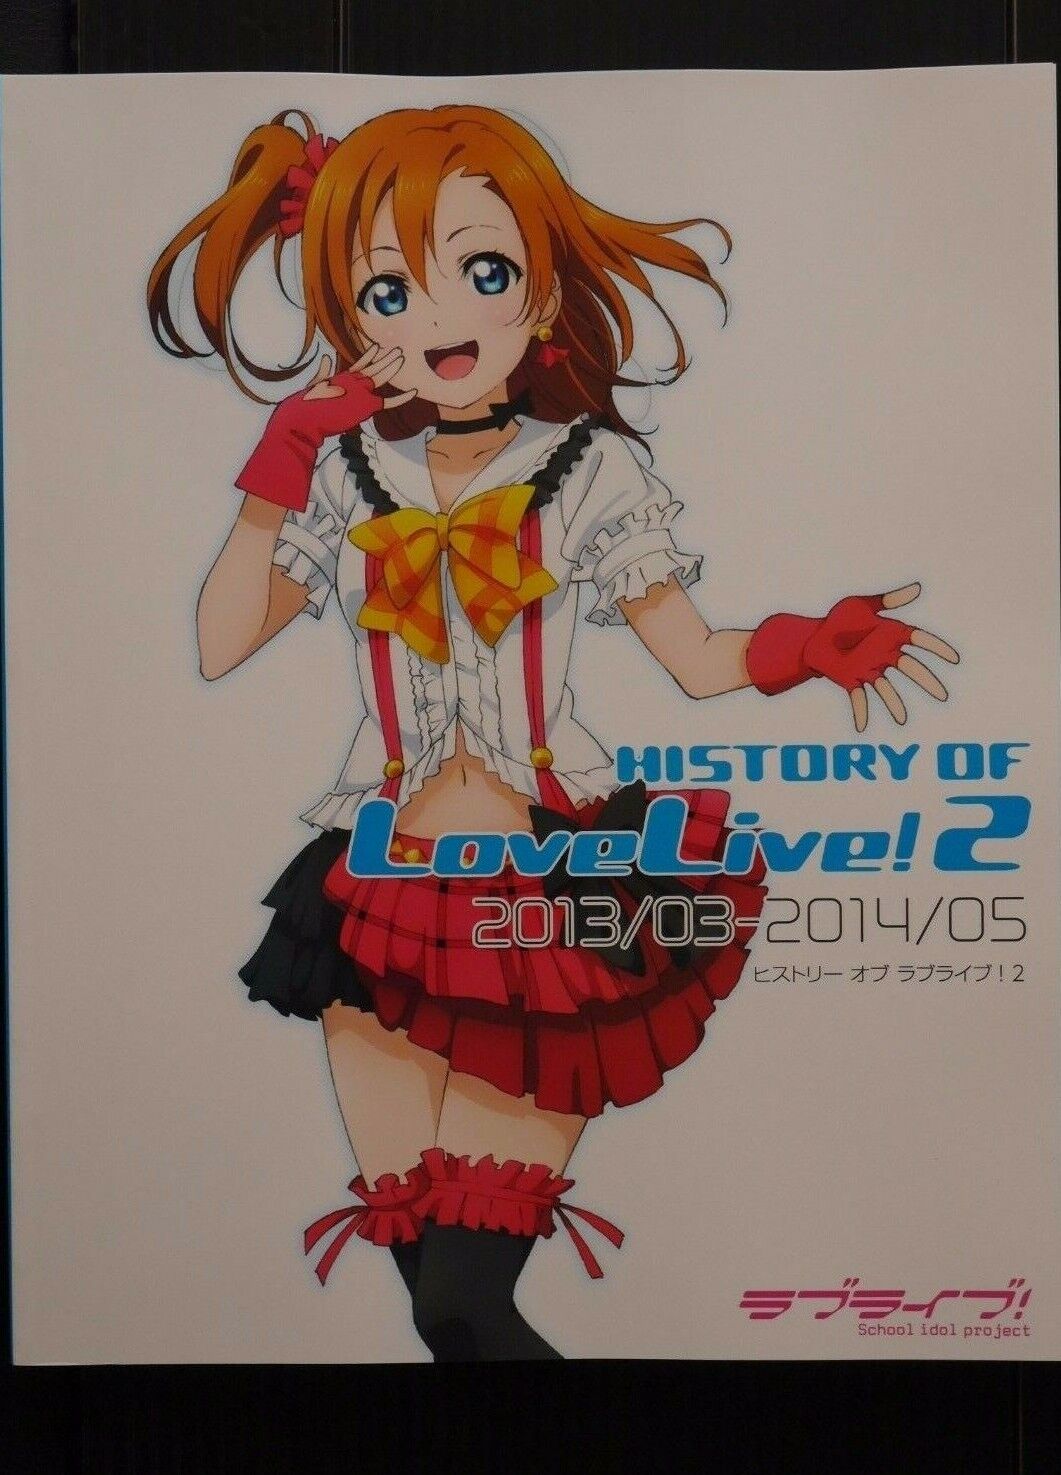 JAPAN History of Love Live 2 ~2013/03 - 2014/05~ (Book)